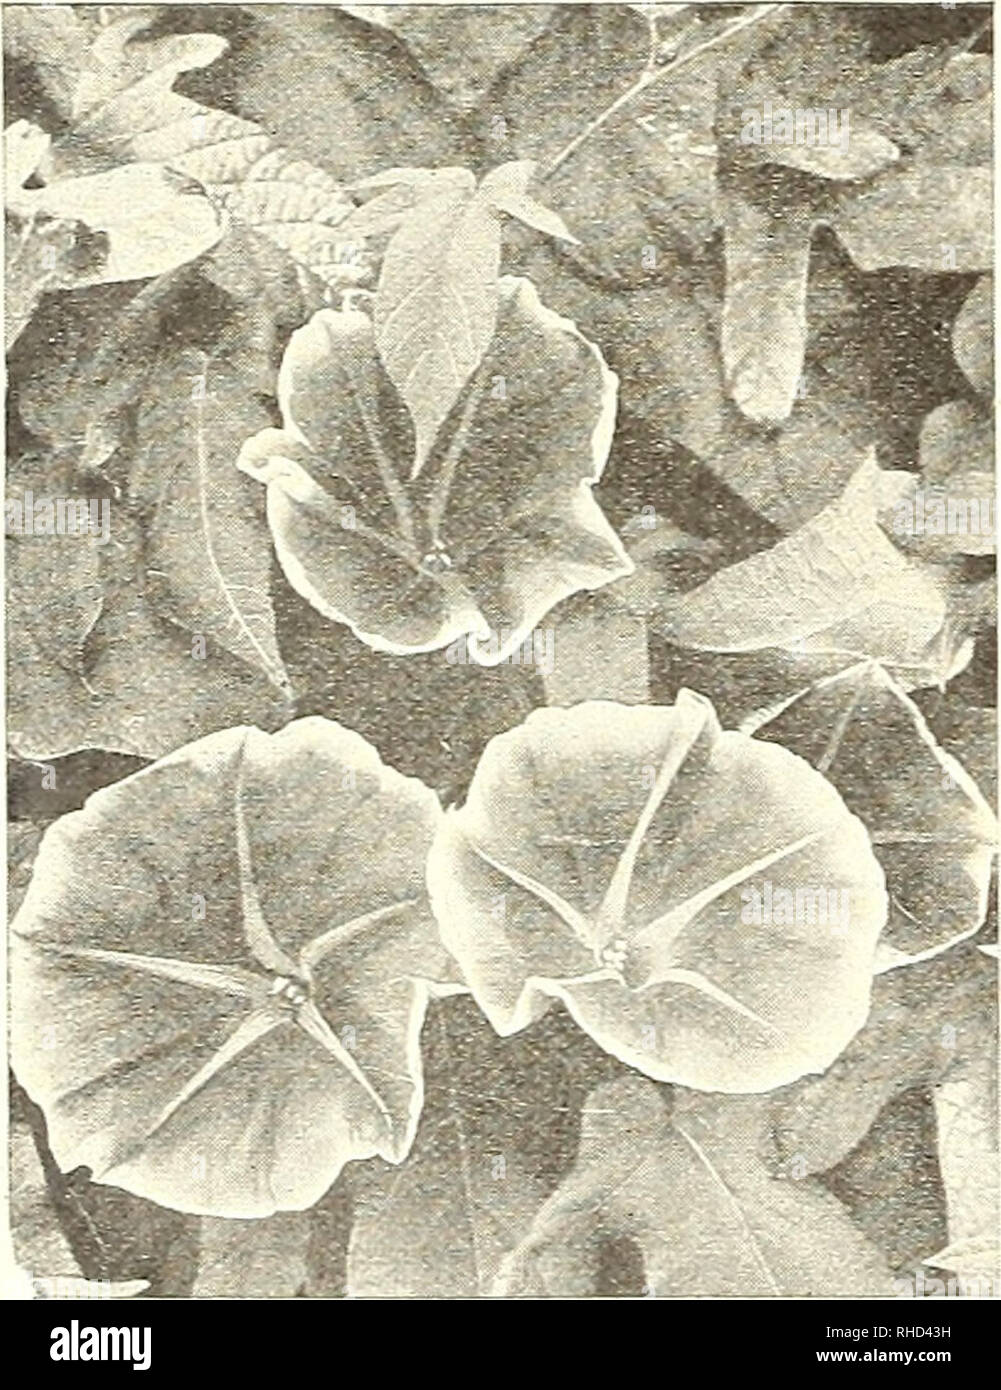 . Bolgiano's capitol city bulbs &amp; seeds : fall 1922. Nurseries (Horticulture) Catalogs; Bulbs (Plants) Catalogs; Seeds Catalogs. ANNUAL CLIMBING VINES. These hardy an- nual climbers are very easy to grow, and it is remark- able how quickly the vines attain a great height. Any of the varieties are suitable for cover- ing unsightly fences, etc. 23. B A L L 0 0 N VINE, or &quot;L0VE= IN=A=PUFF.&quot; A. An attractive climber of quick growth and bears profusely inflated seed capules. Pkt. 5 cts.; % oz. 10 cts.; oz. 25 cts. 4.'^. BALSAM APPLE (Momor= dica Balsamina). Morning- Glory. ^- ^ i'^iPi Stock Photo